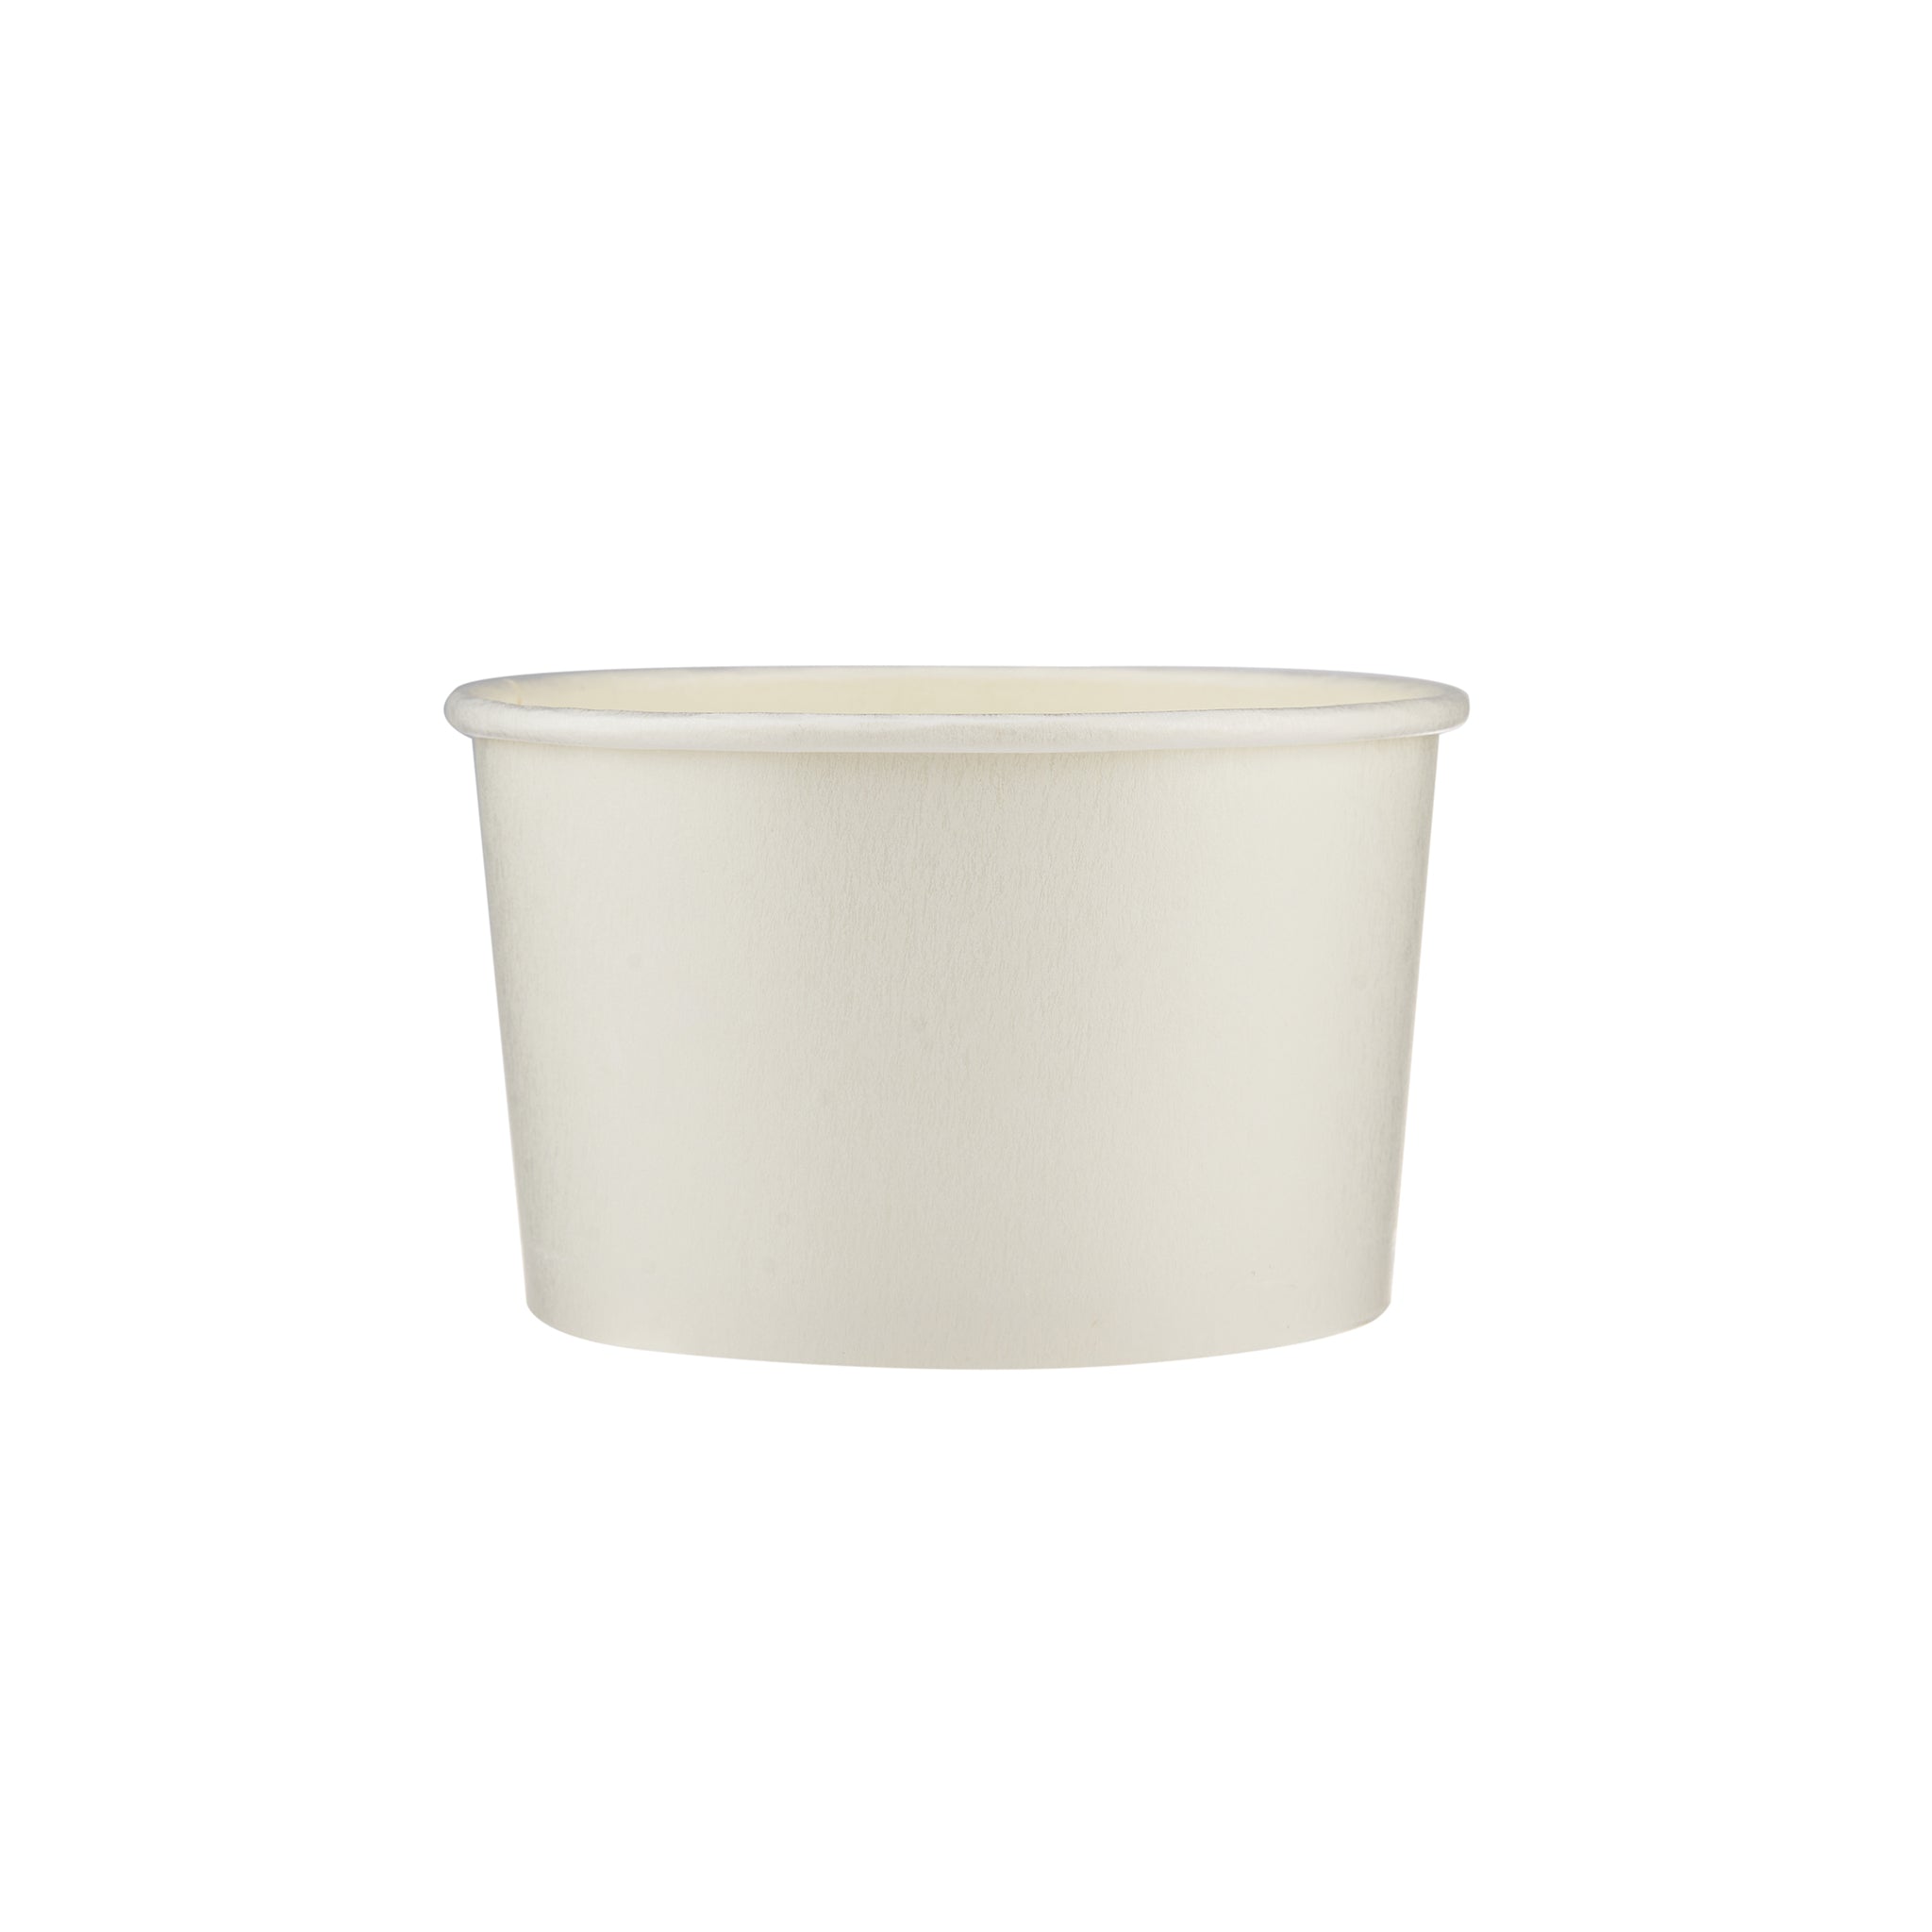 600 Pieces 750 ml White Paper Soup Bowl - Hotpack Global